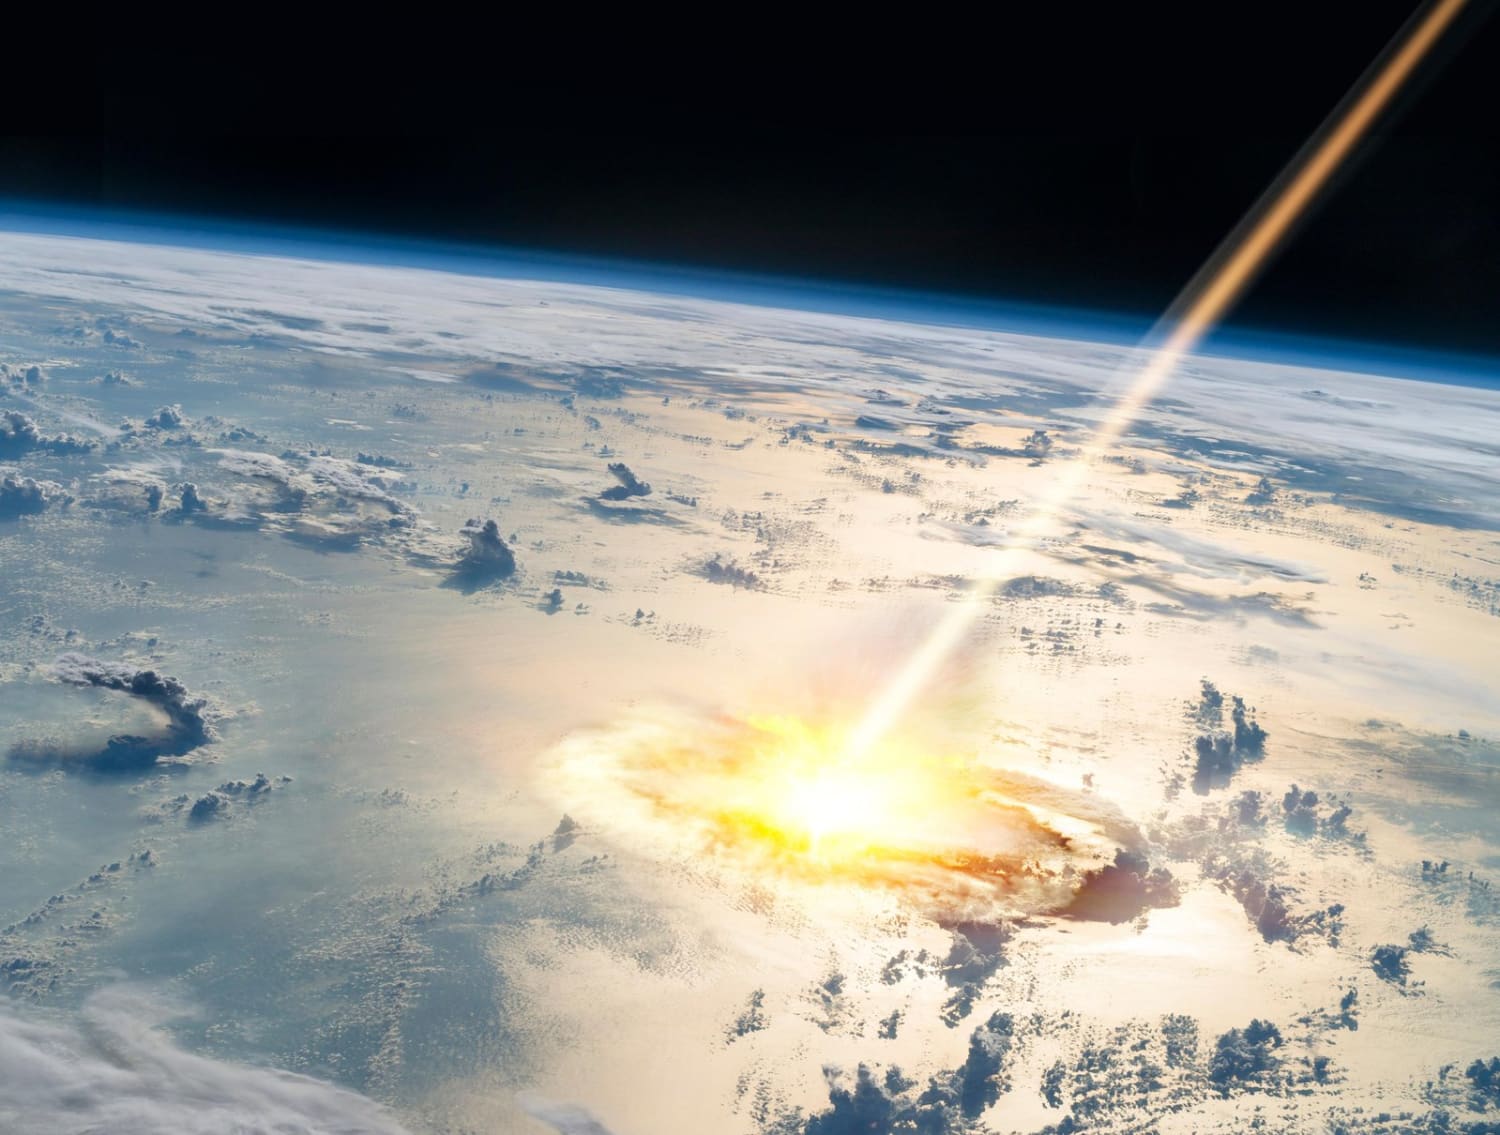 What Happened the Day a Giant, Dinosaur-Killing Asteroid Hit the Earth